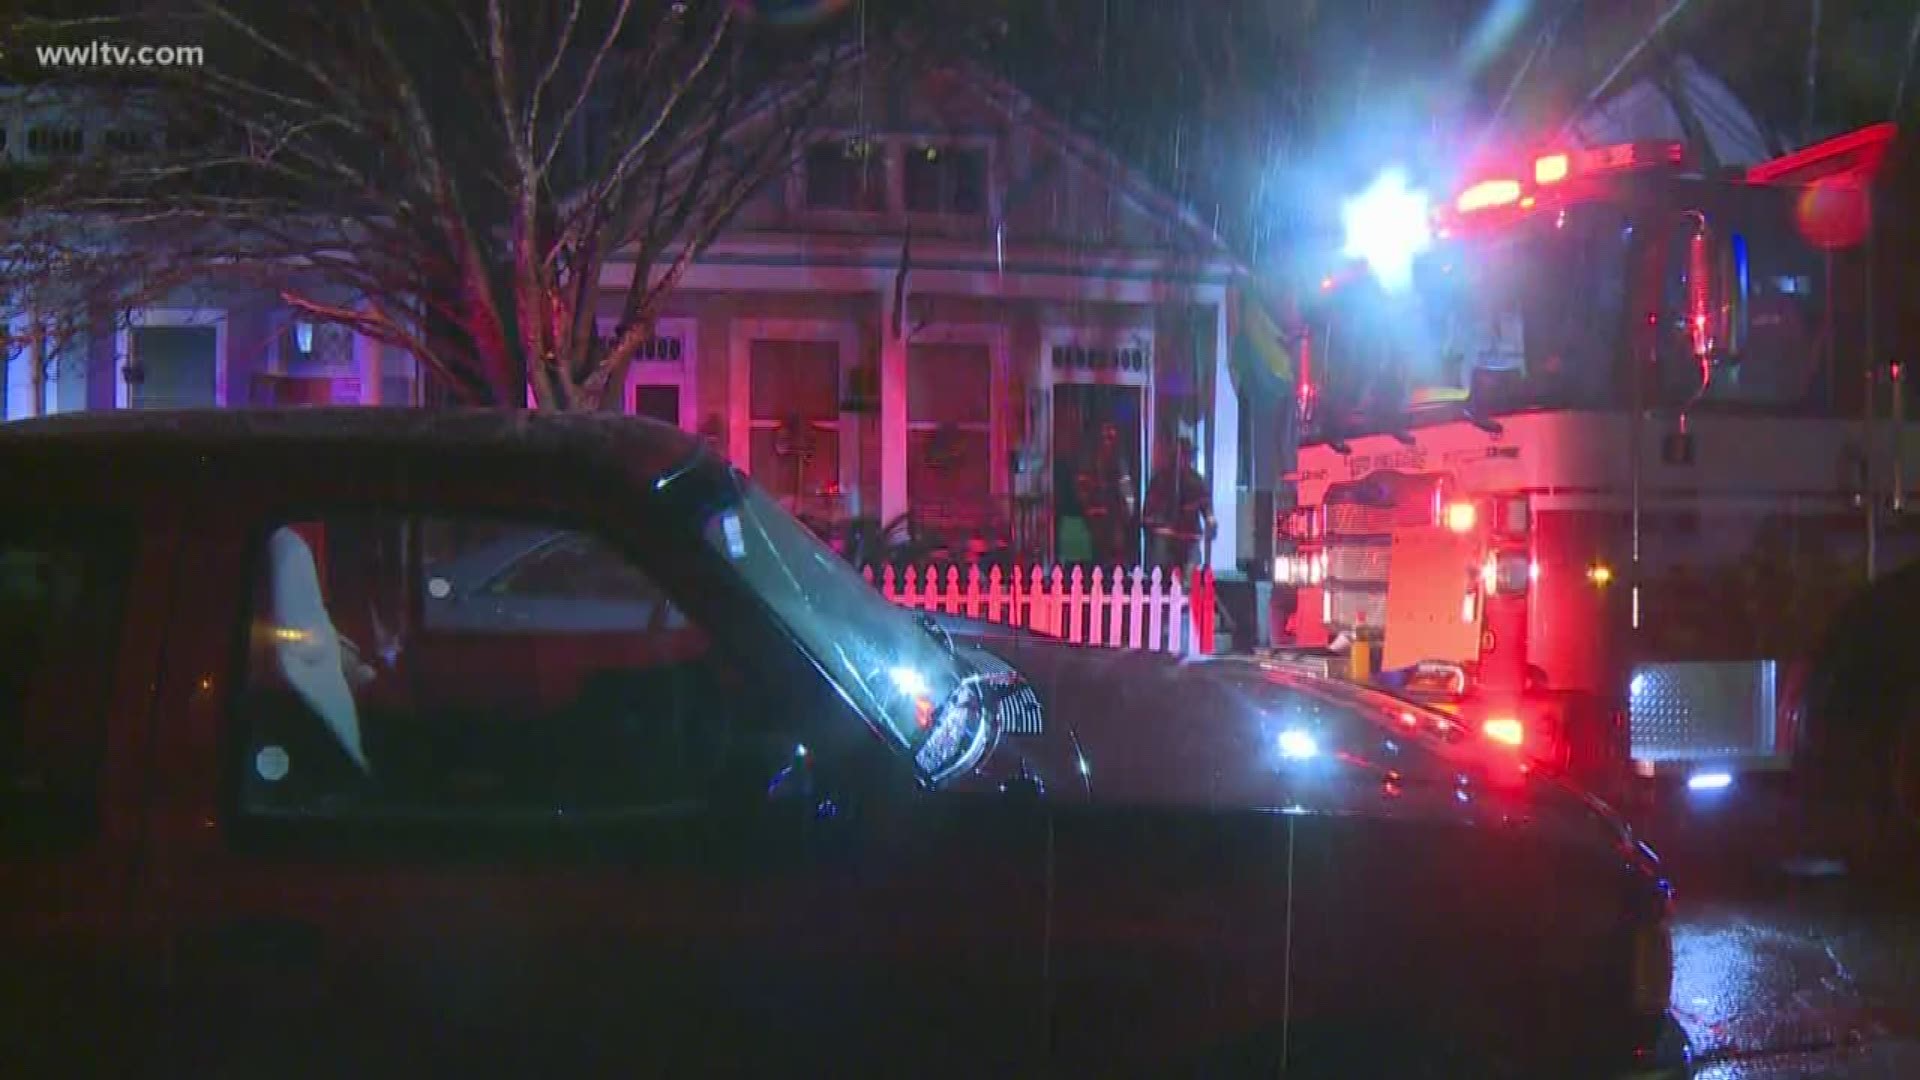 According to the New Orleans Fire Department, the fire started around 12:37 a.m. in the 3300 block of Dumaine Street.